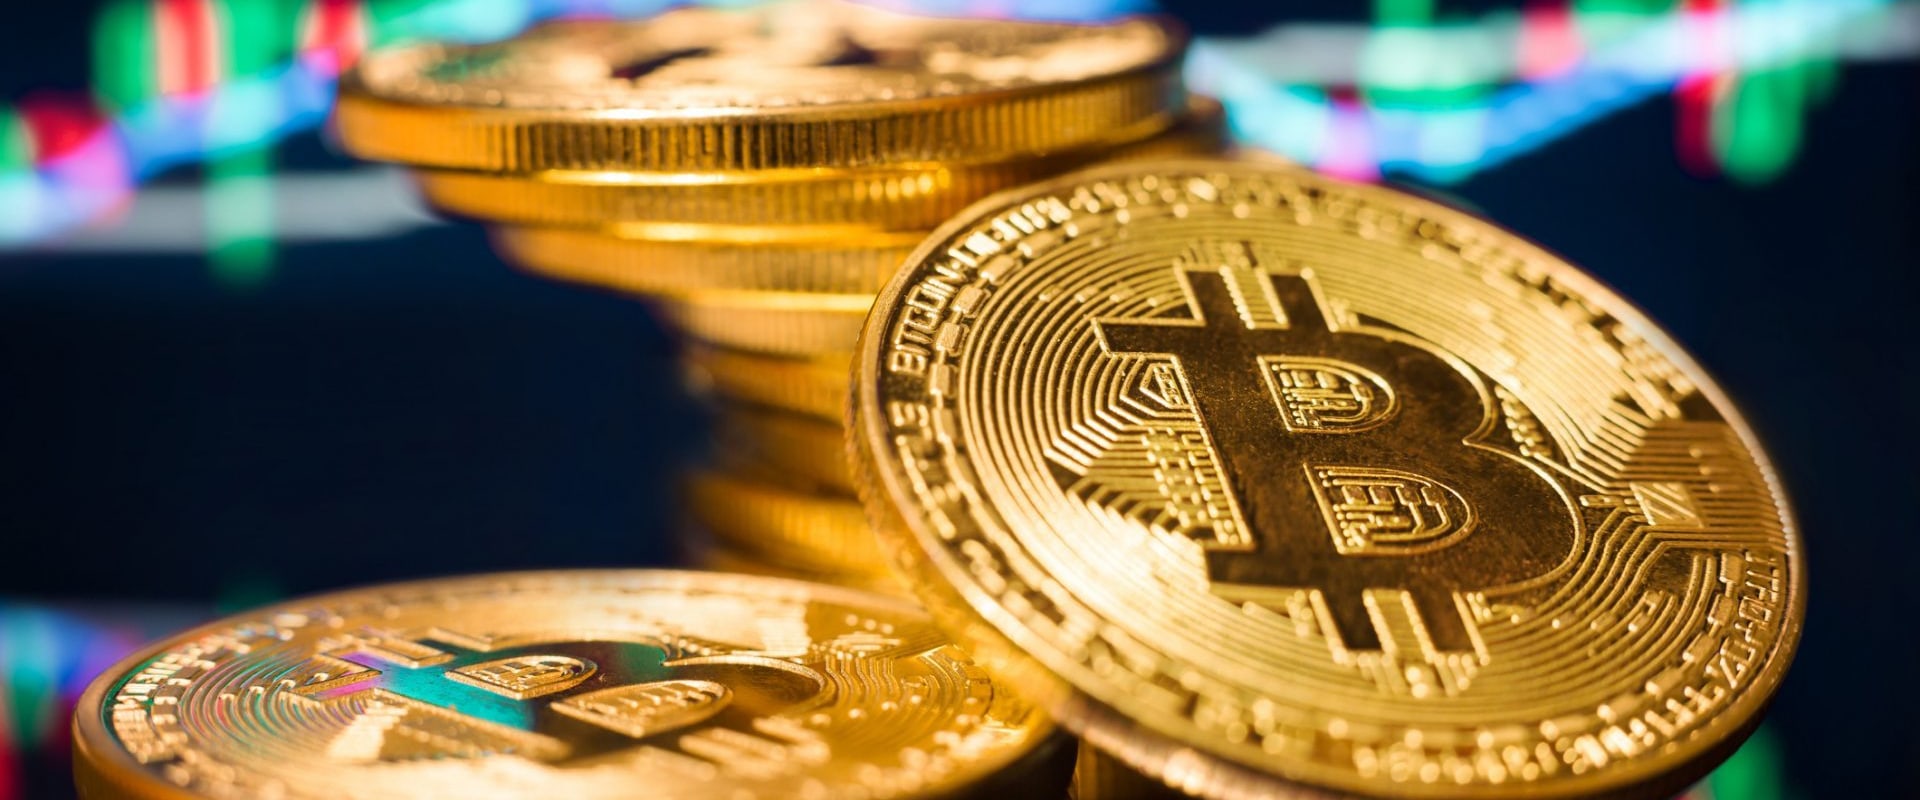 How Long Will Cryptocurrency Last? A Financial Expert's Perspective